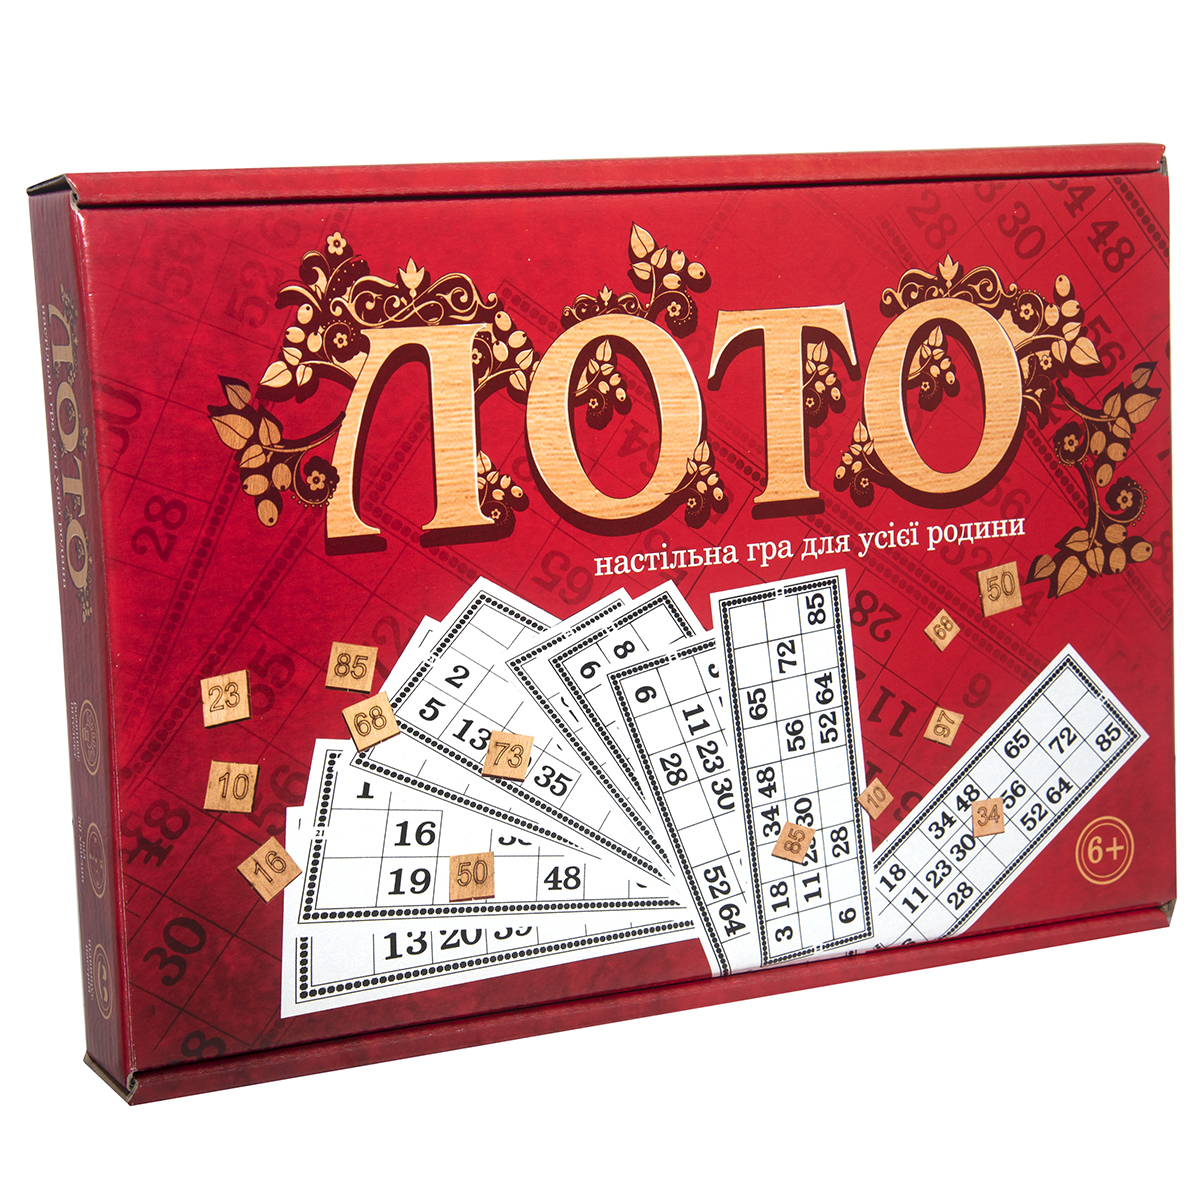 "Lotto with wooden chips" (ukr.) (30656)